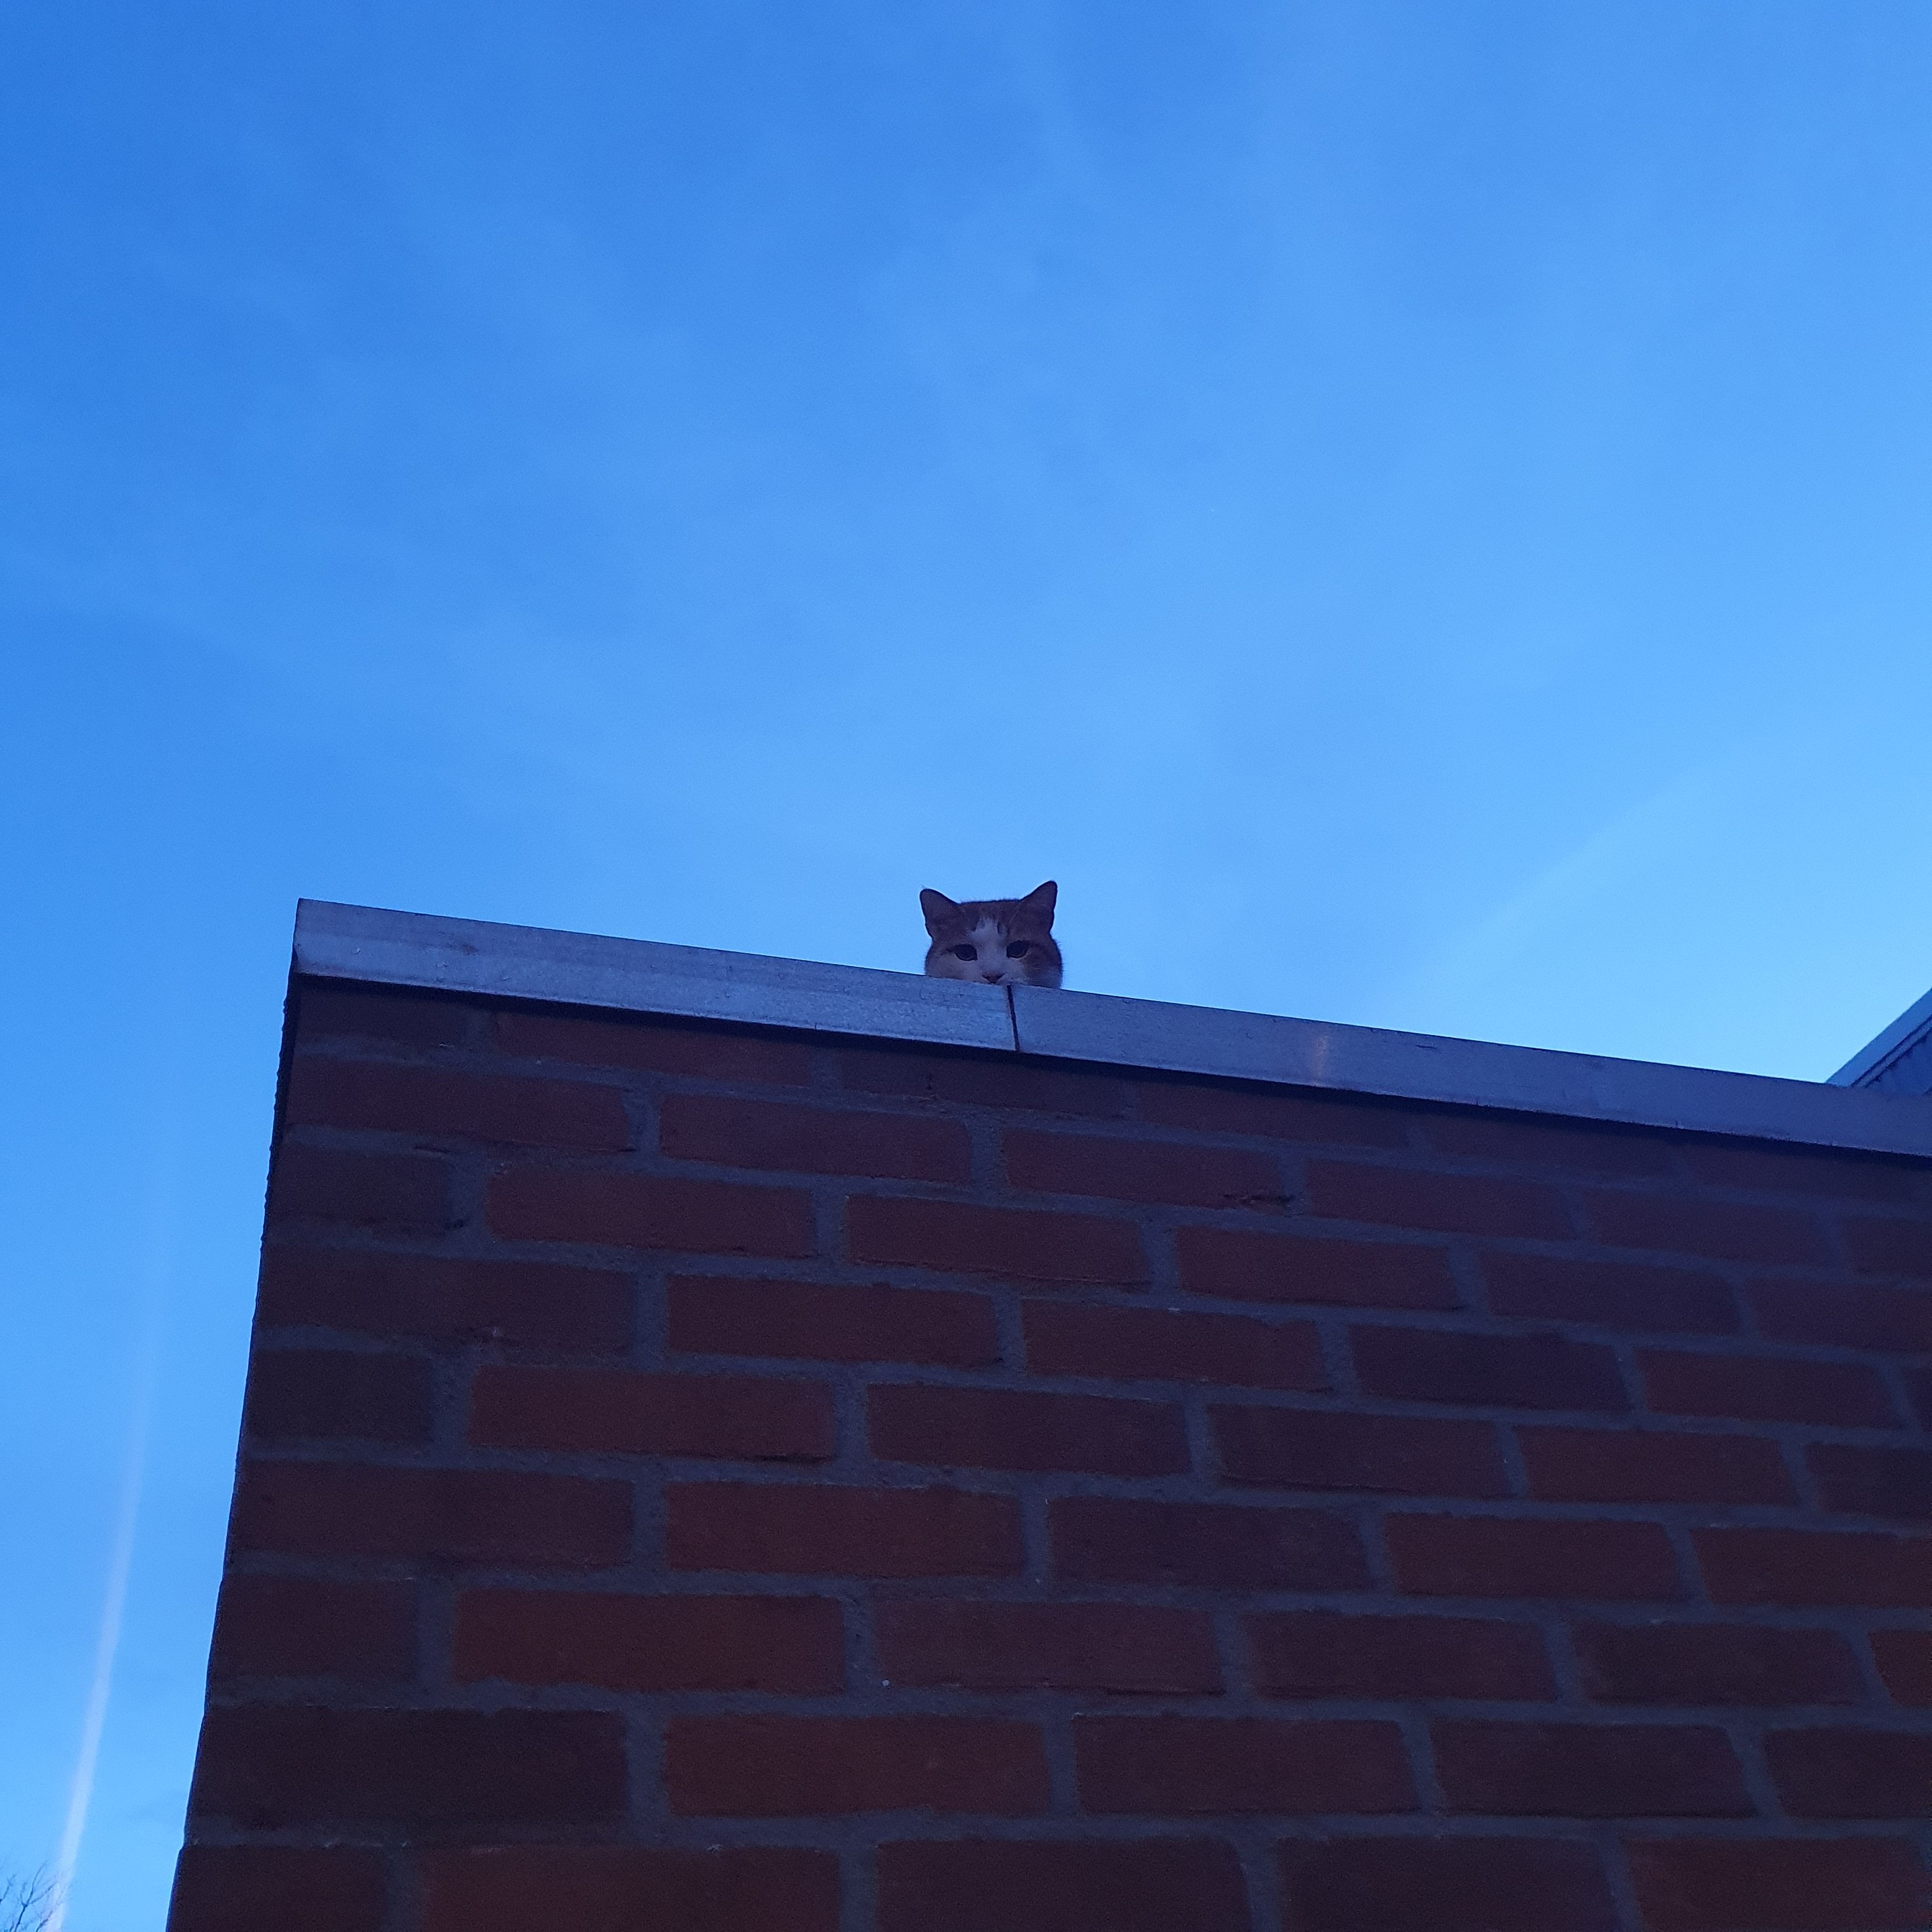 A cat face visible just above a flat roof, looking down towards me. Above a dark grey-blue evening sky. 